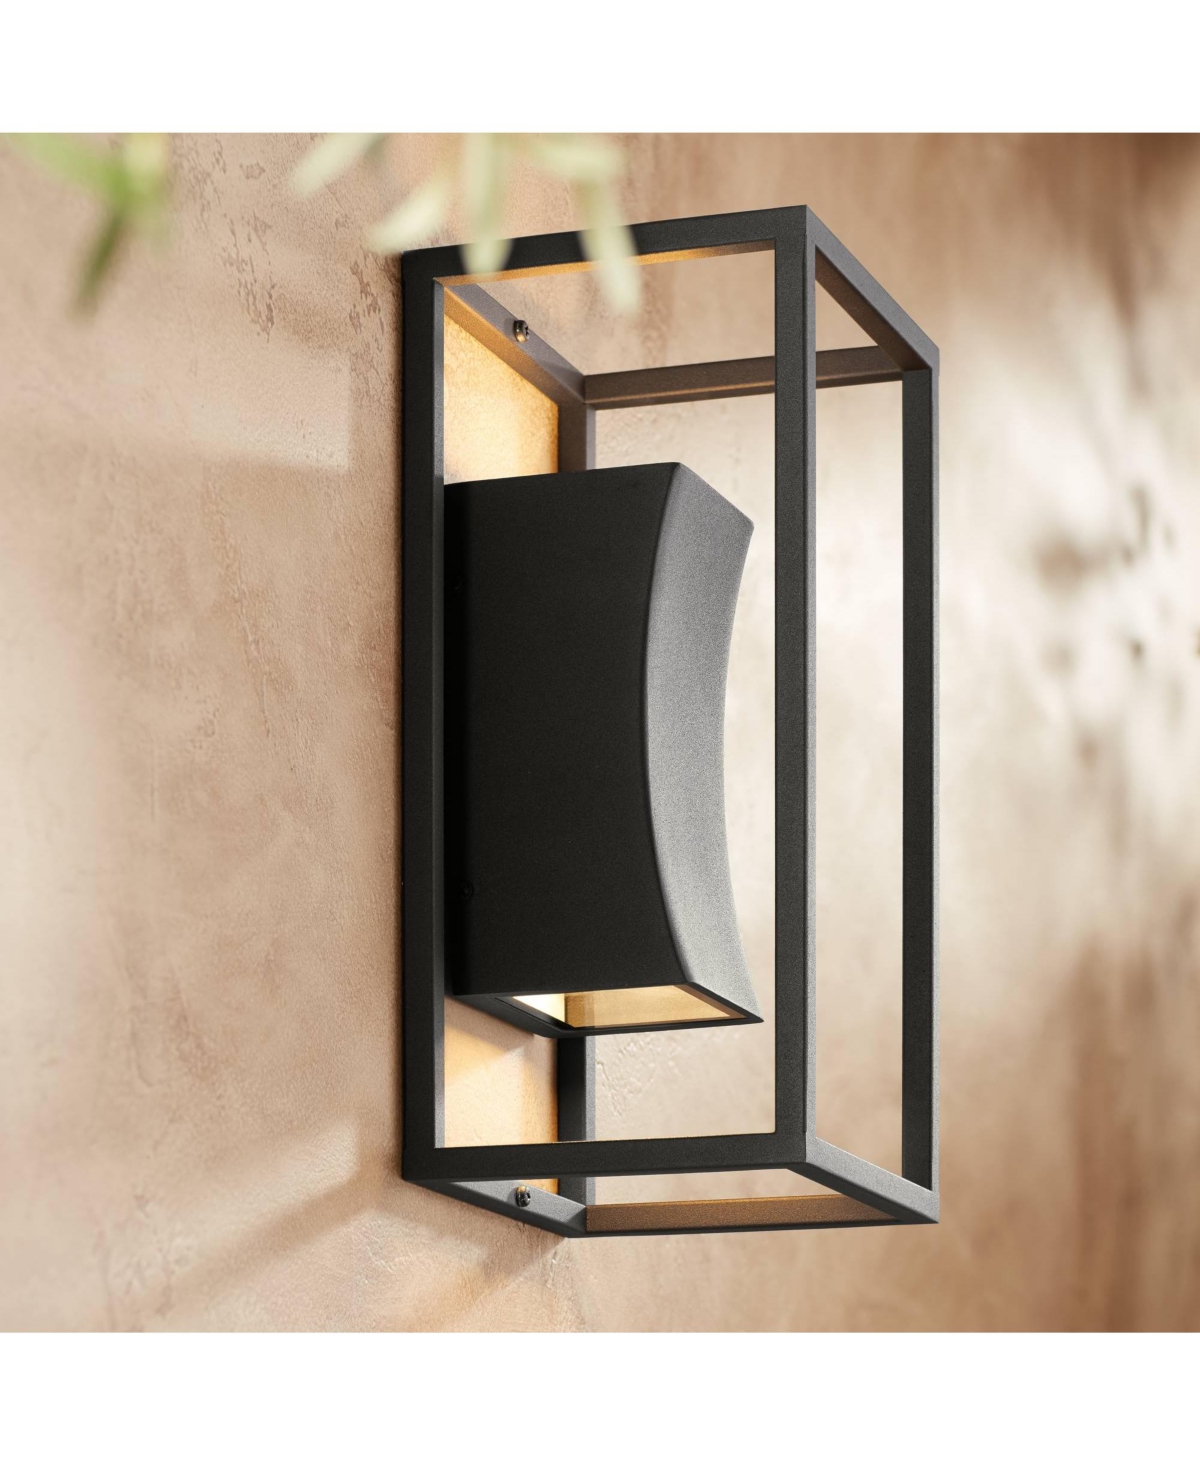 Kell Modern Outdoor Wall Light Fixture Textured Black Dimmable Led Up Down 14" Sanded Glass Diffuser Up Down for Exterior Barn Deck House Porch Yard P